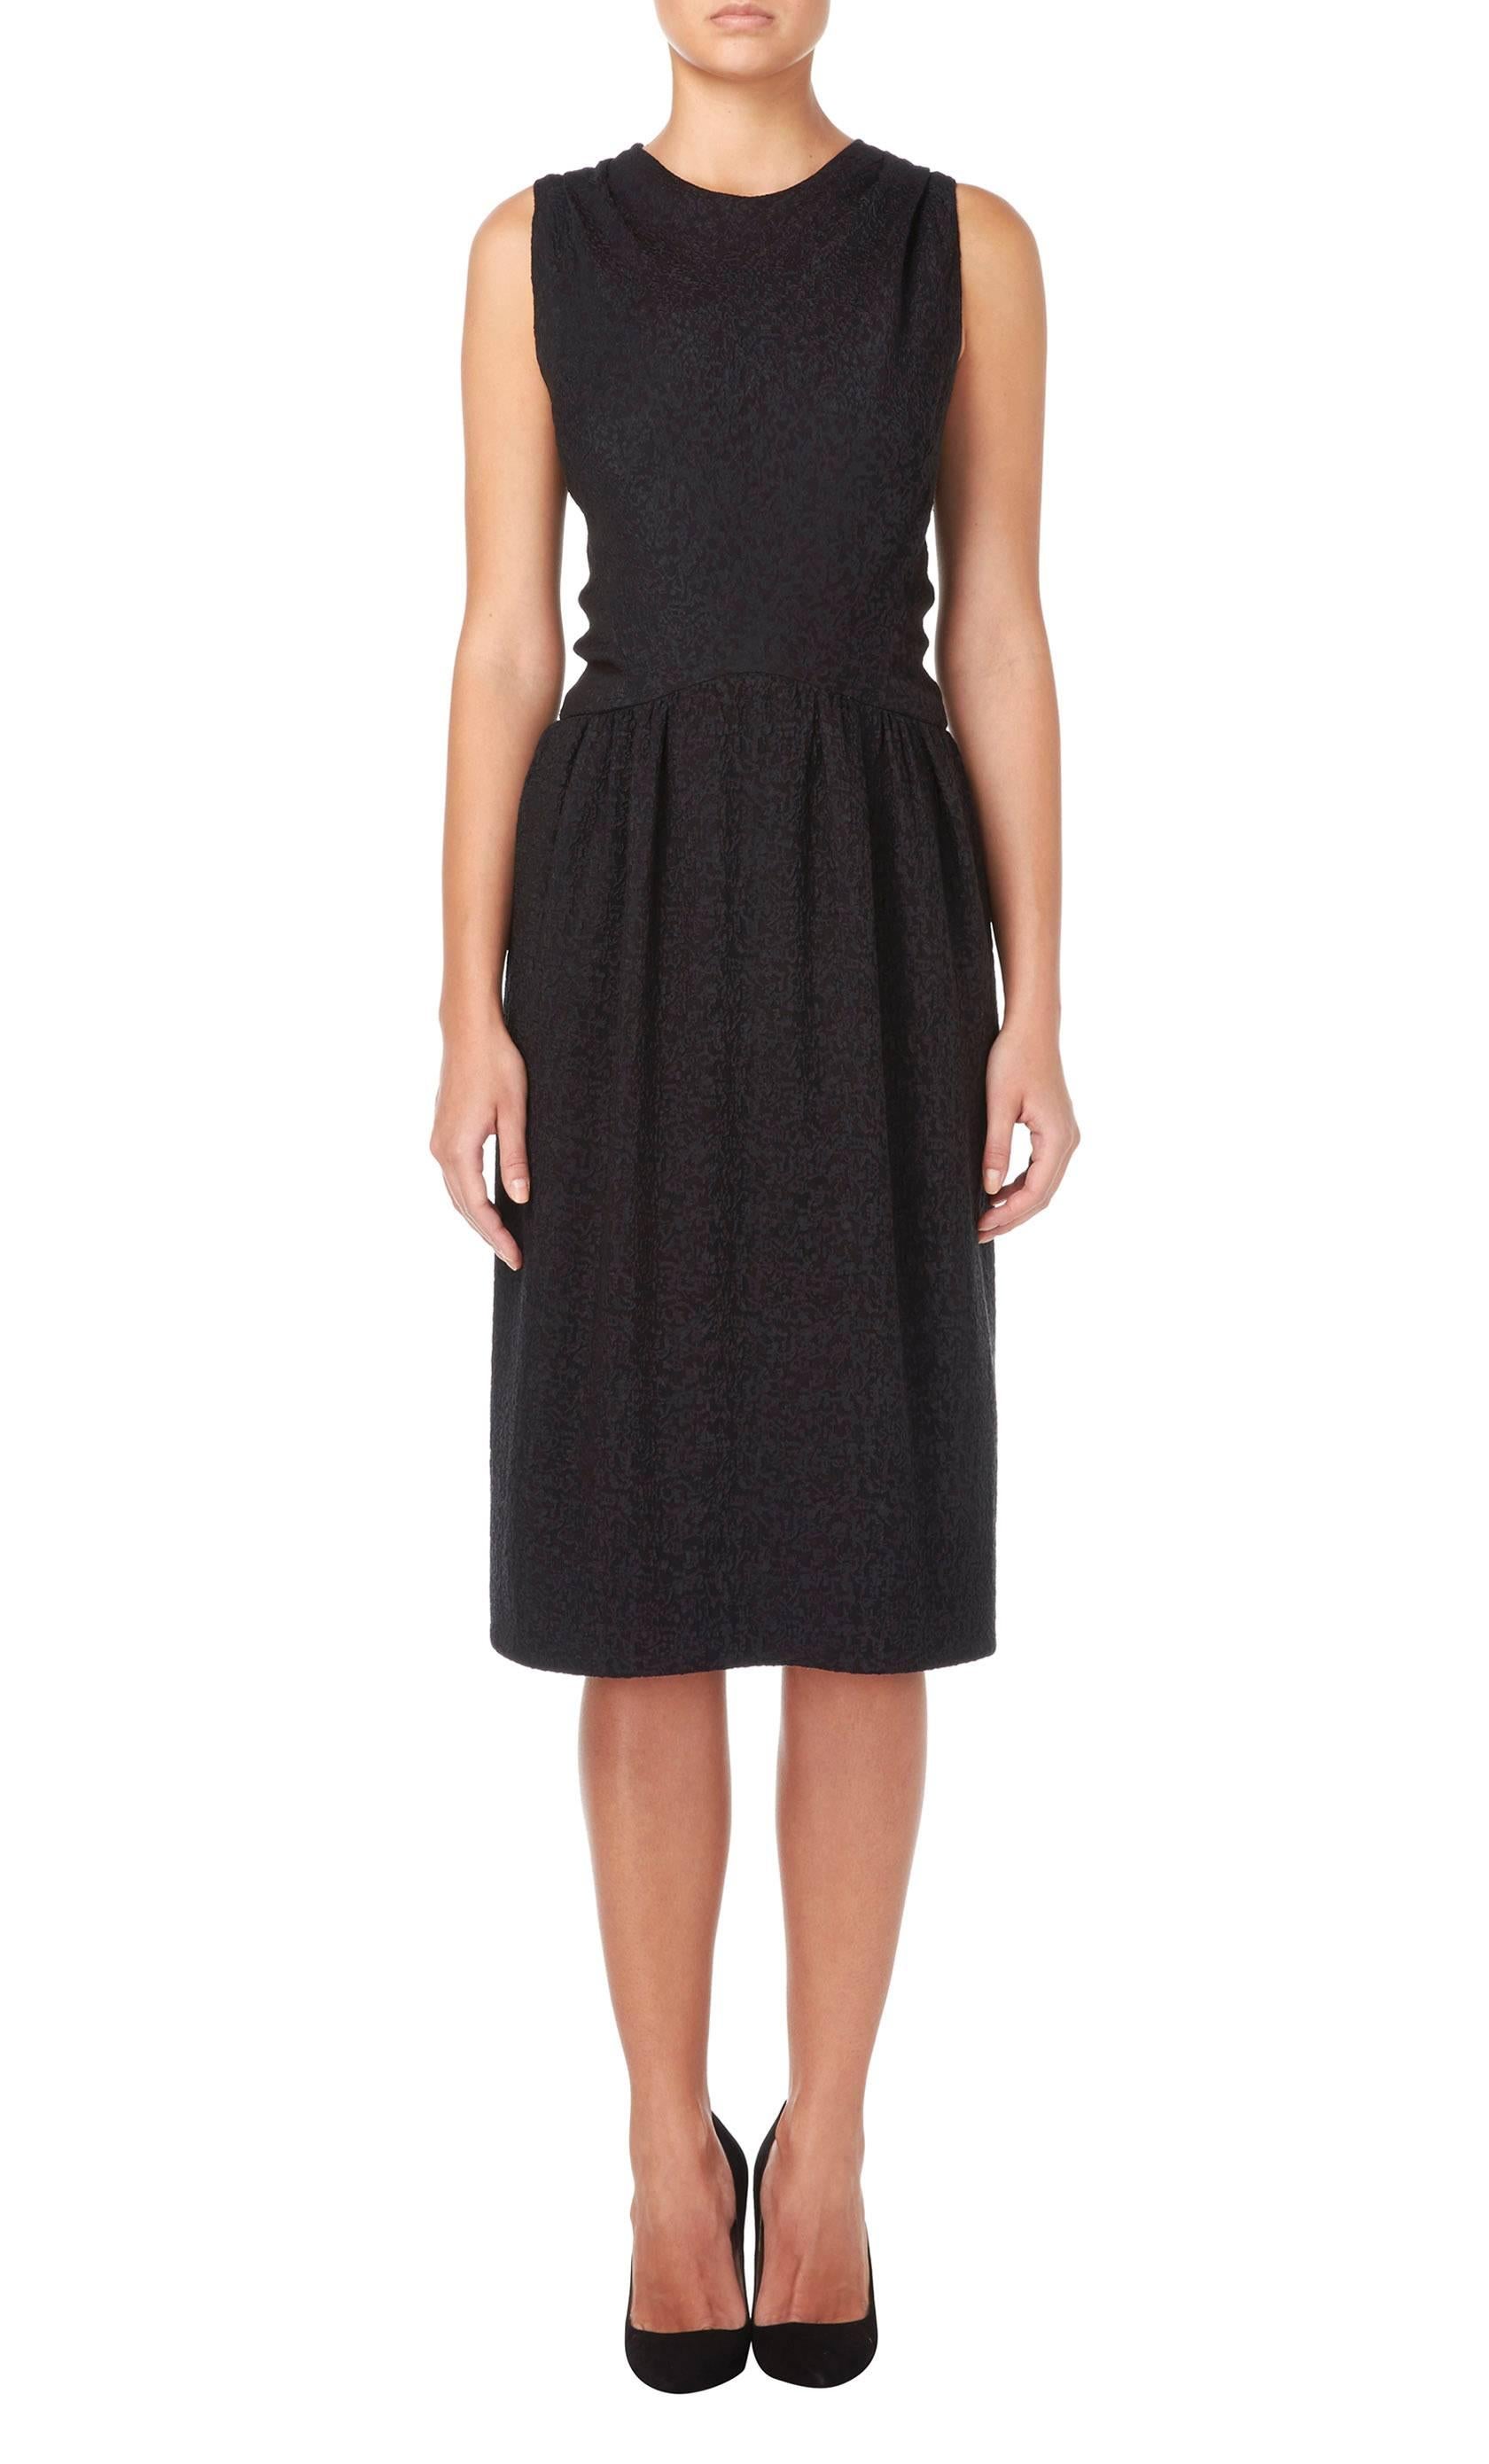 This incredibly chic little black dress is a true classic and will quickly become a wardrobe staple. Constructed in black cloqu̩ silk and featuring a cross over to the back, the dress skims the body to create a flattering silhouette. Fabric-matched